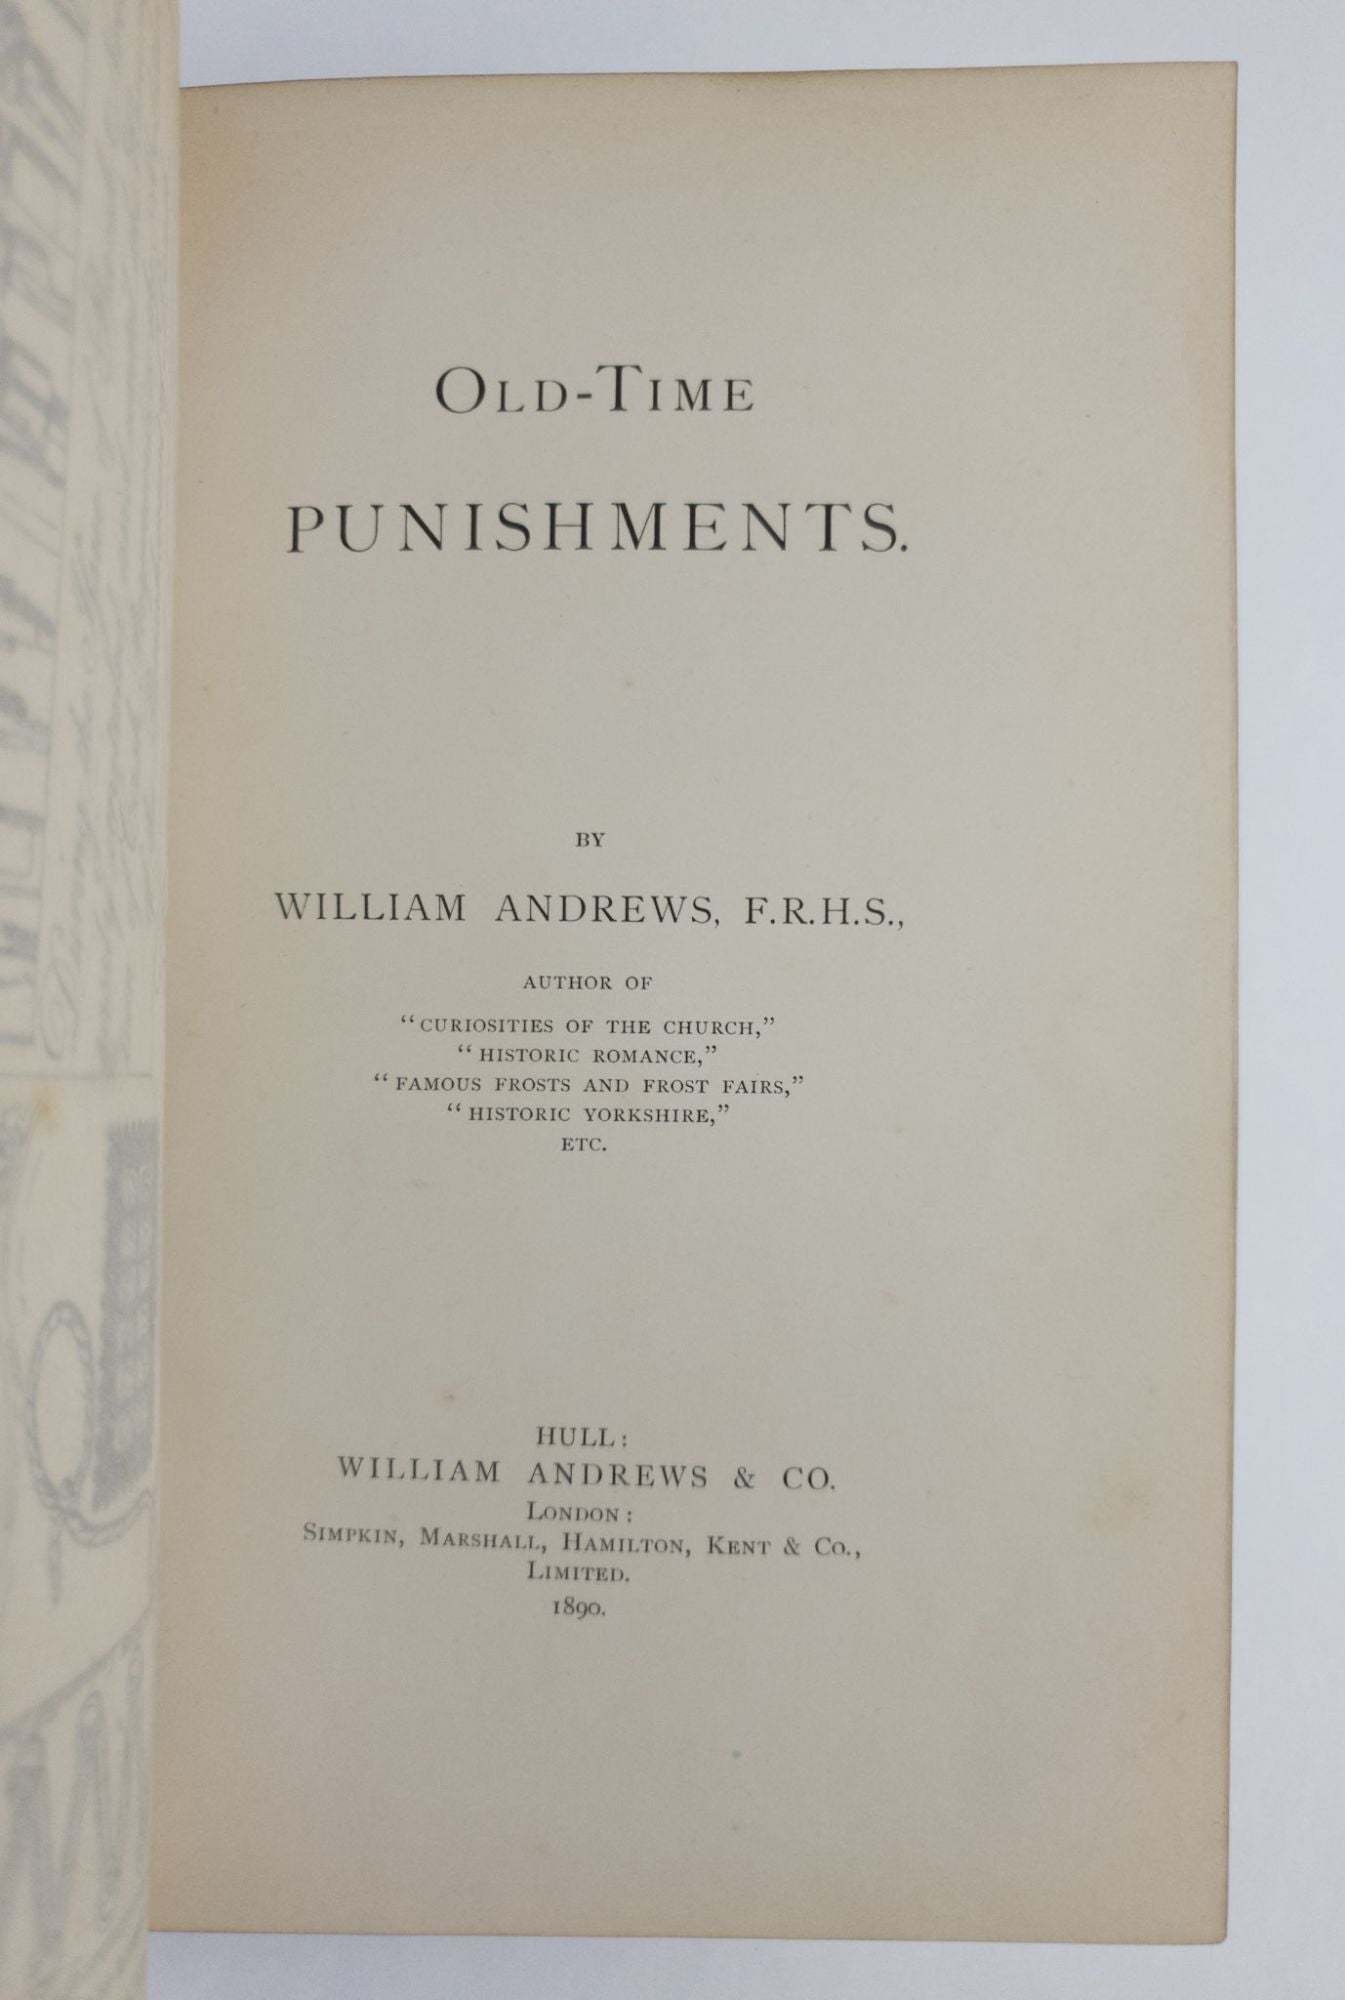 Product Image for OLD-TIME PUNISHMENTS